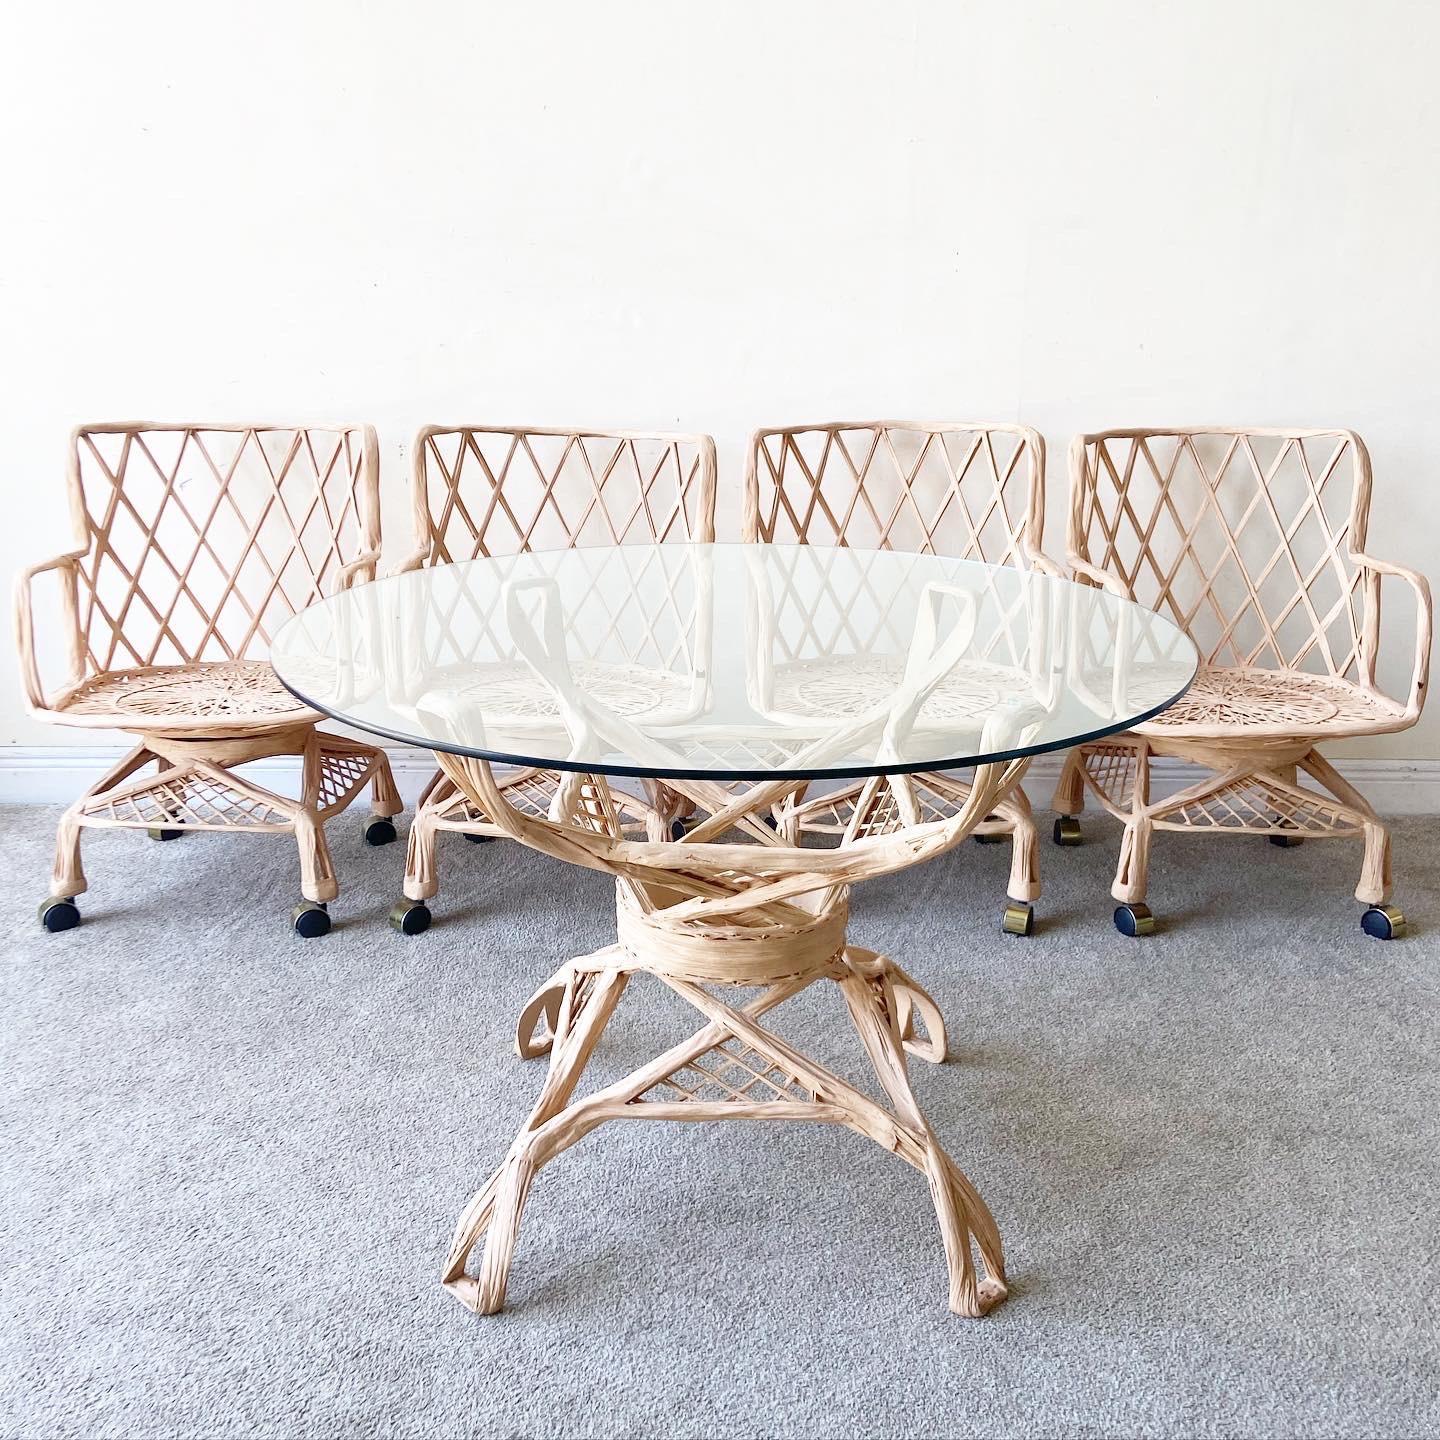 Incredible mid century modern spun fiberglass dining set by Russell Woodard. Set features 4 chairs on coasters with a glass top dining table. Chairs still have the original “W” logo on them.



Table measures 42”D, 28.5”H Seat Height: 15.5 in